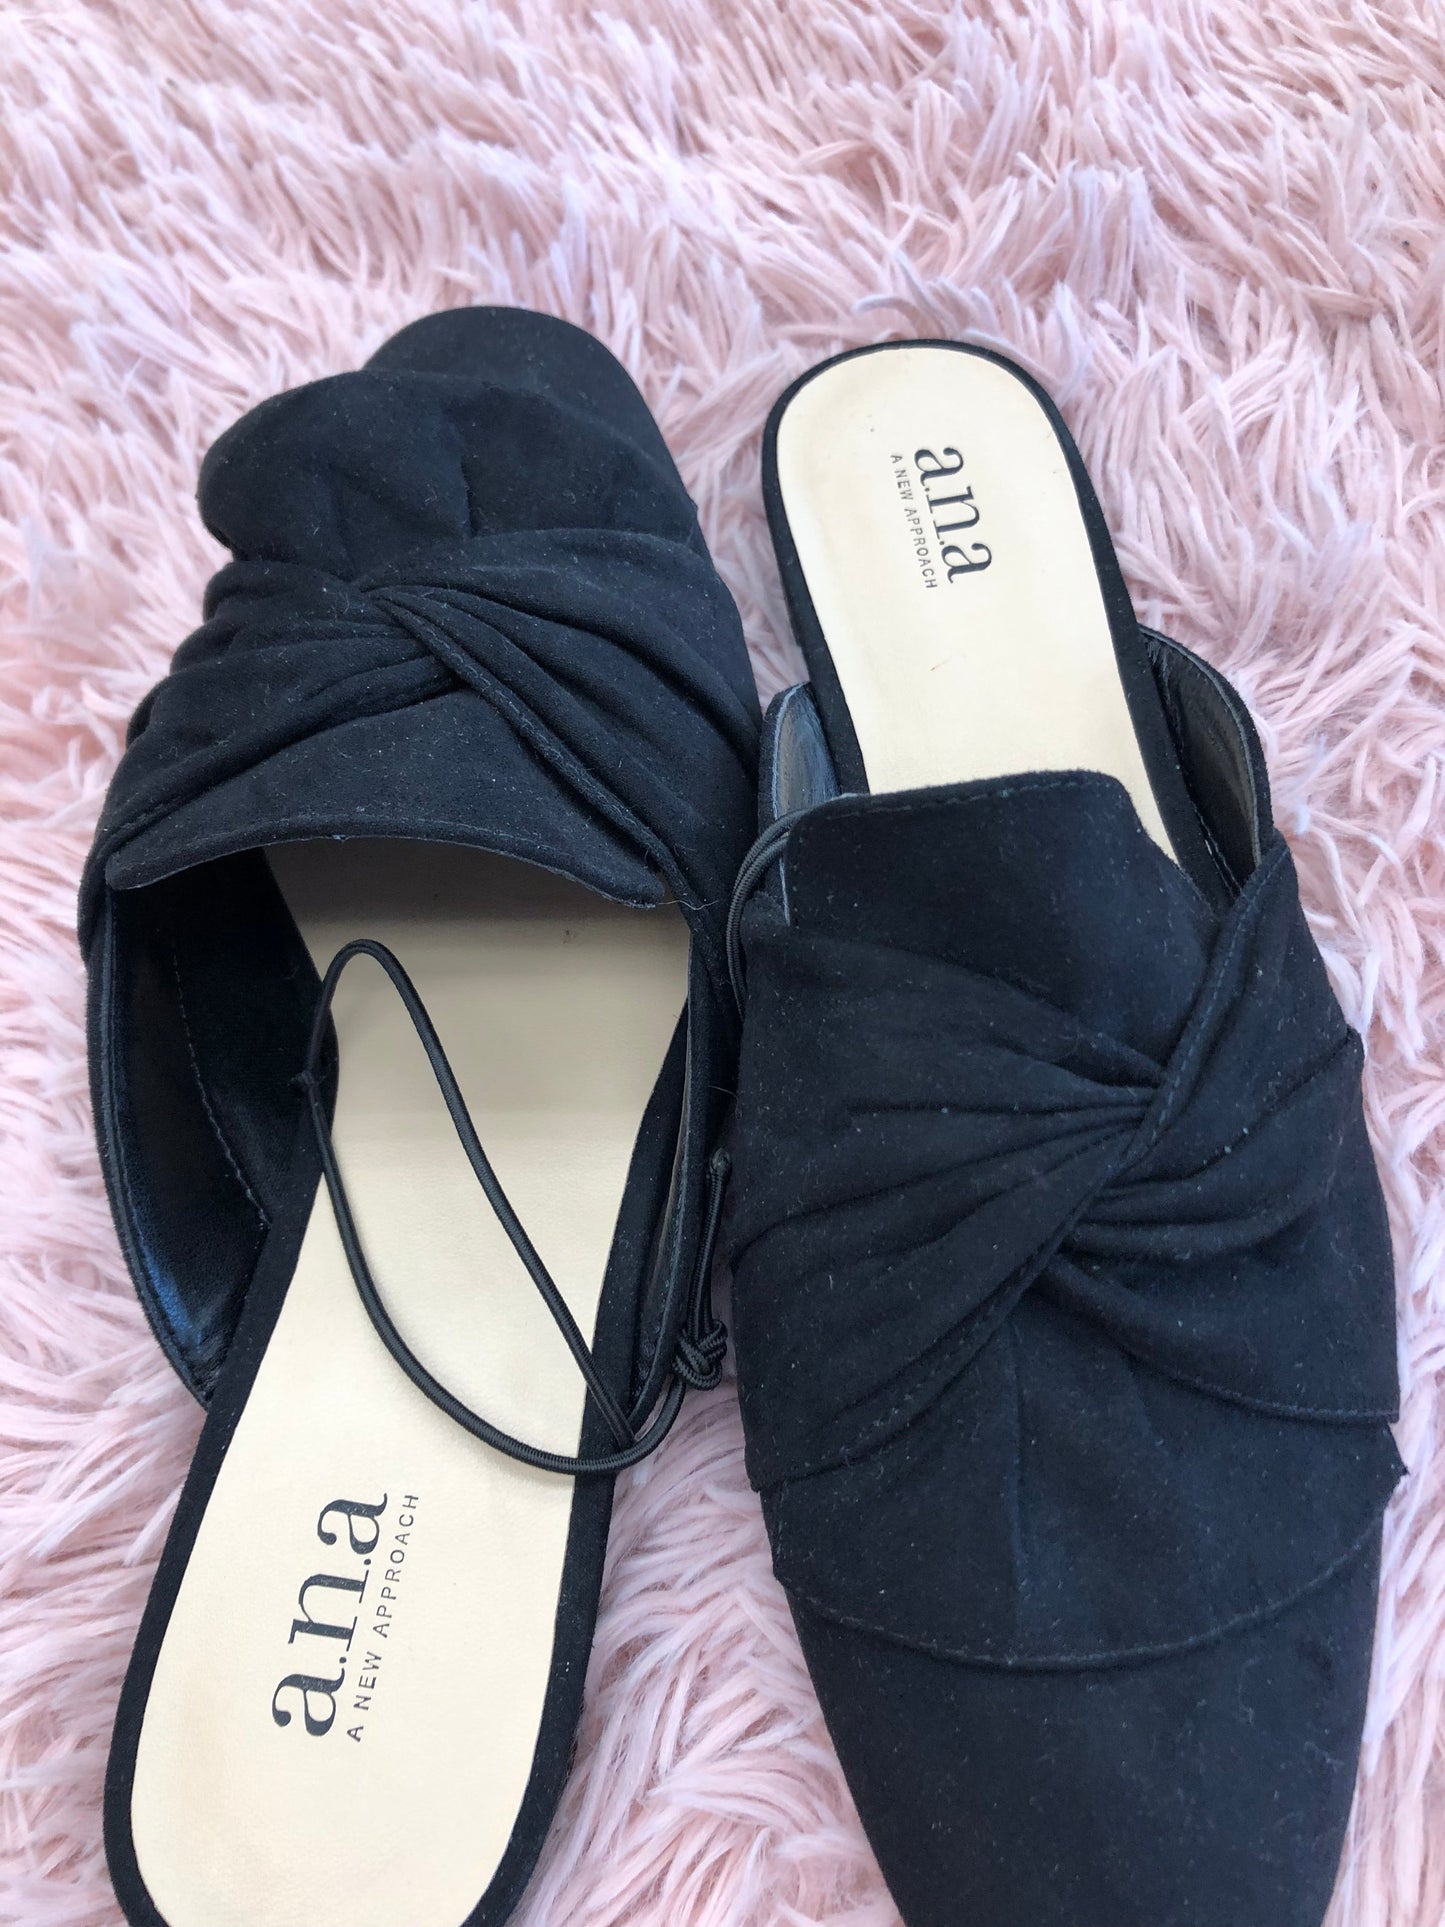 Black Shoes Flats Other Ana, Size 8.5